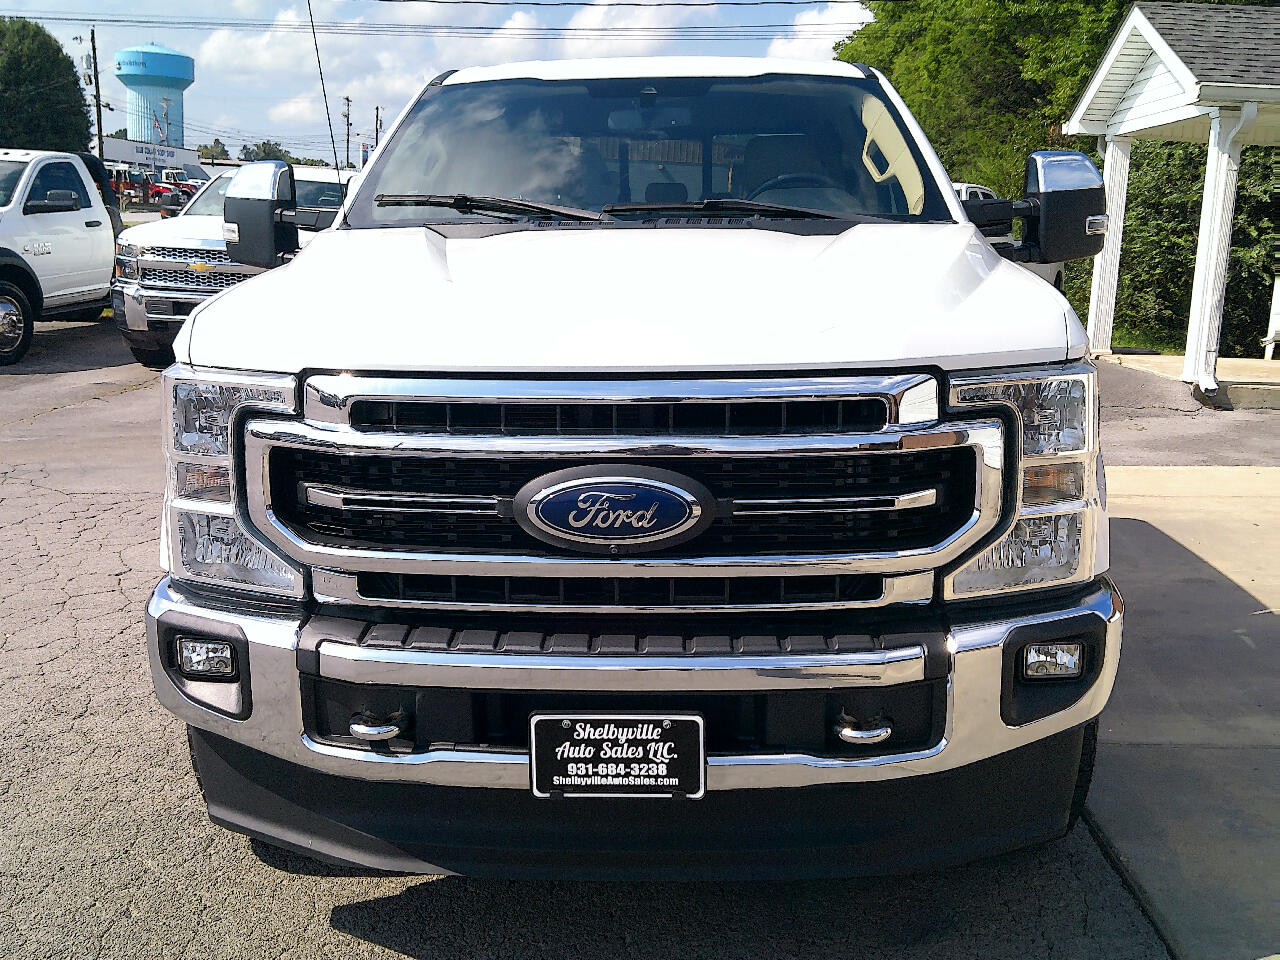 2020 Ford Super Duty F-250 LOADED UP WITH OPTIONSHEATED AND COOLED SEATSBACK UP CAMERANAV